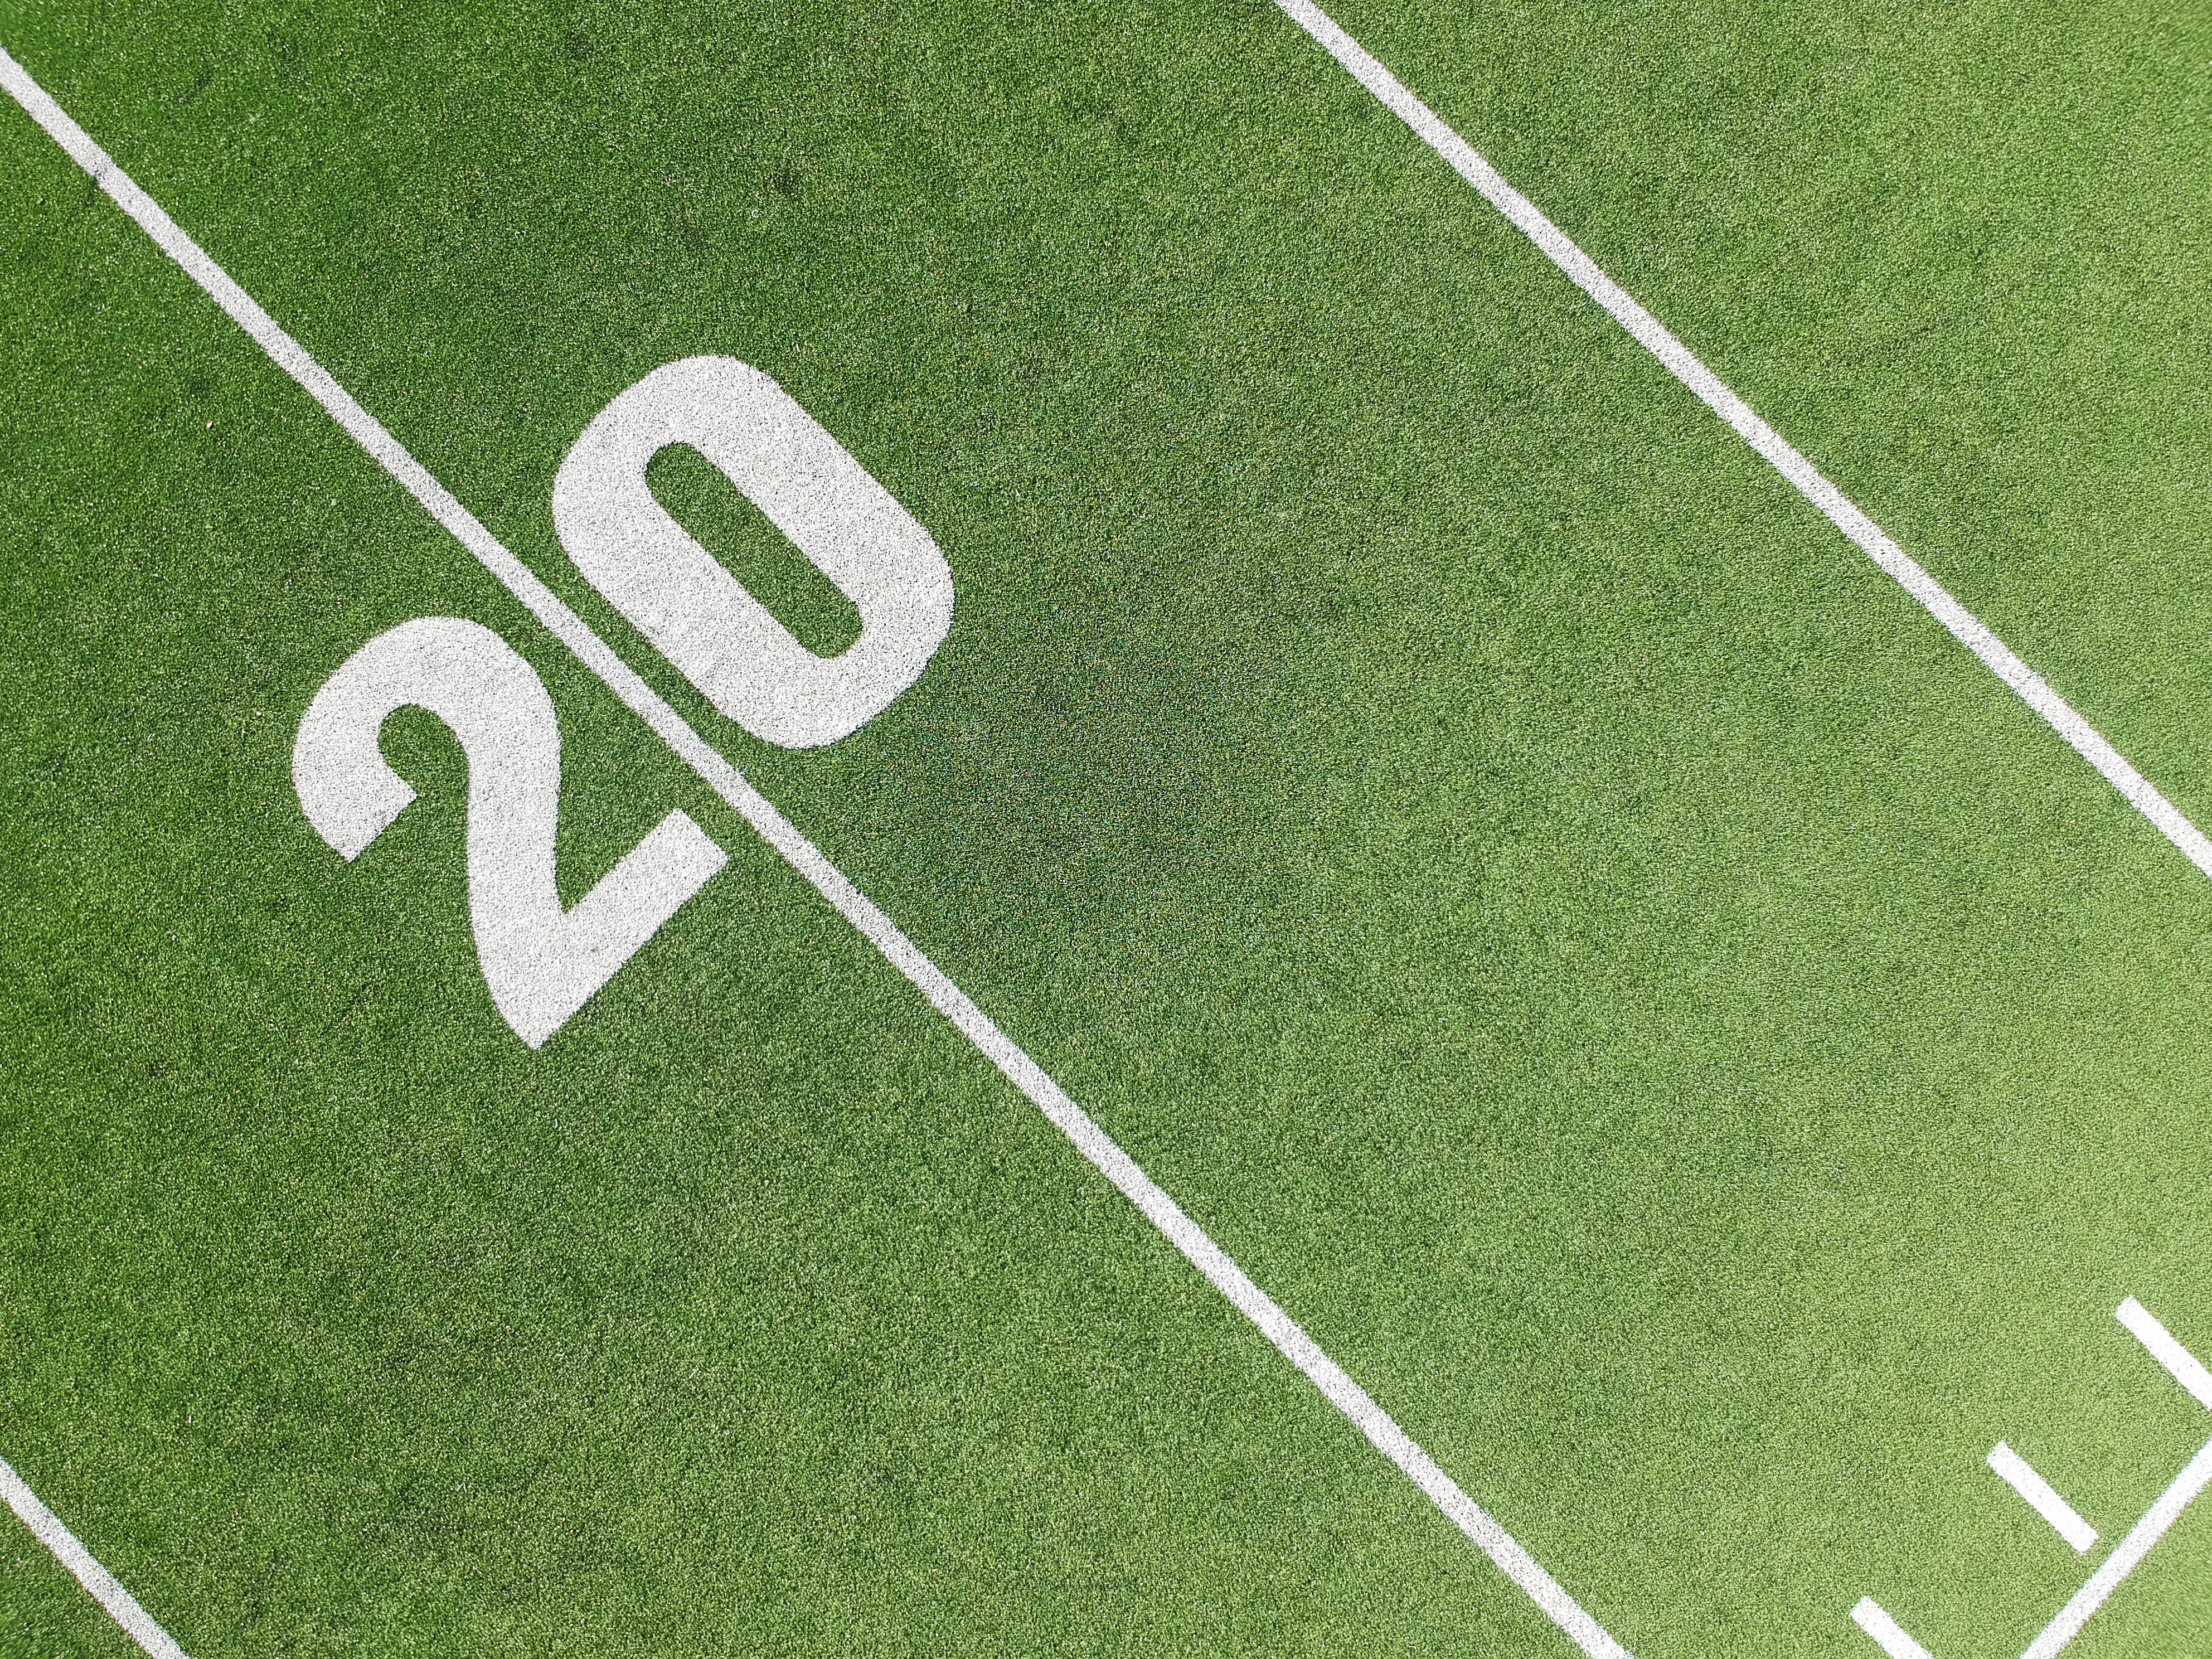 Free stock photo of 20, American football, artificial grass